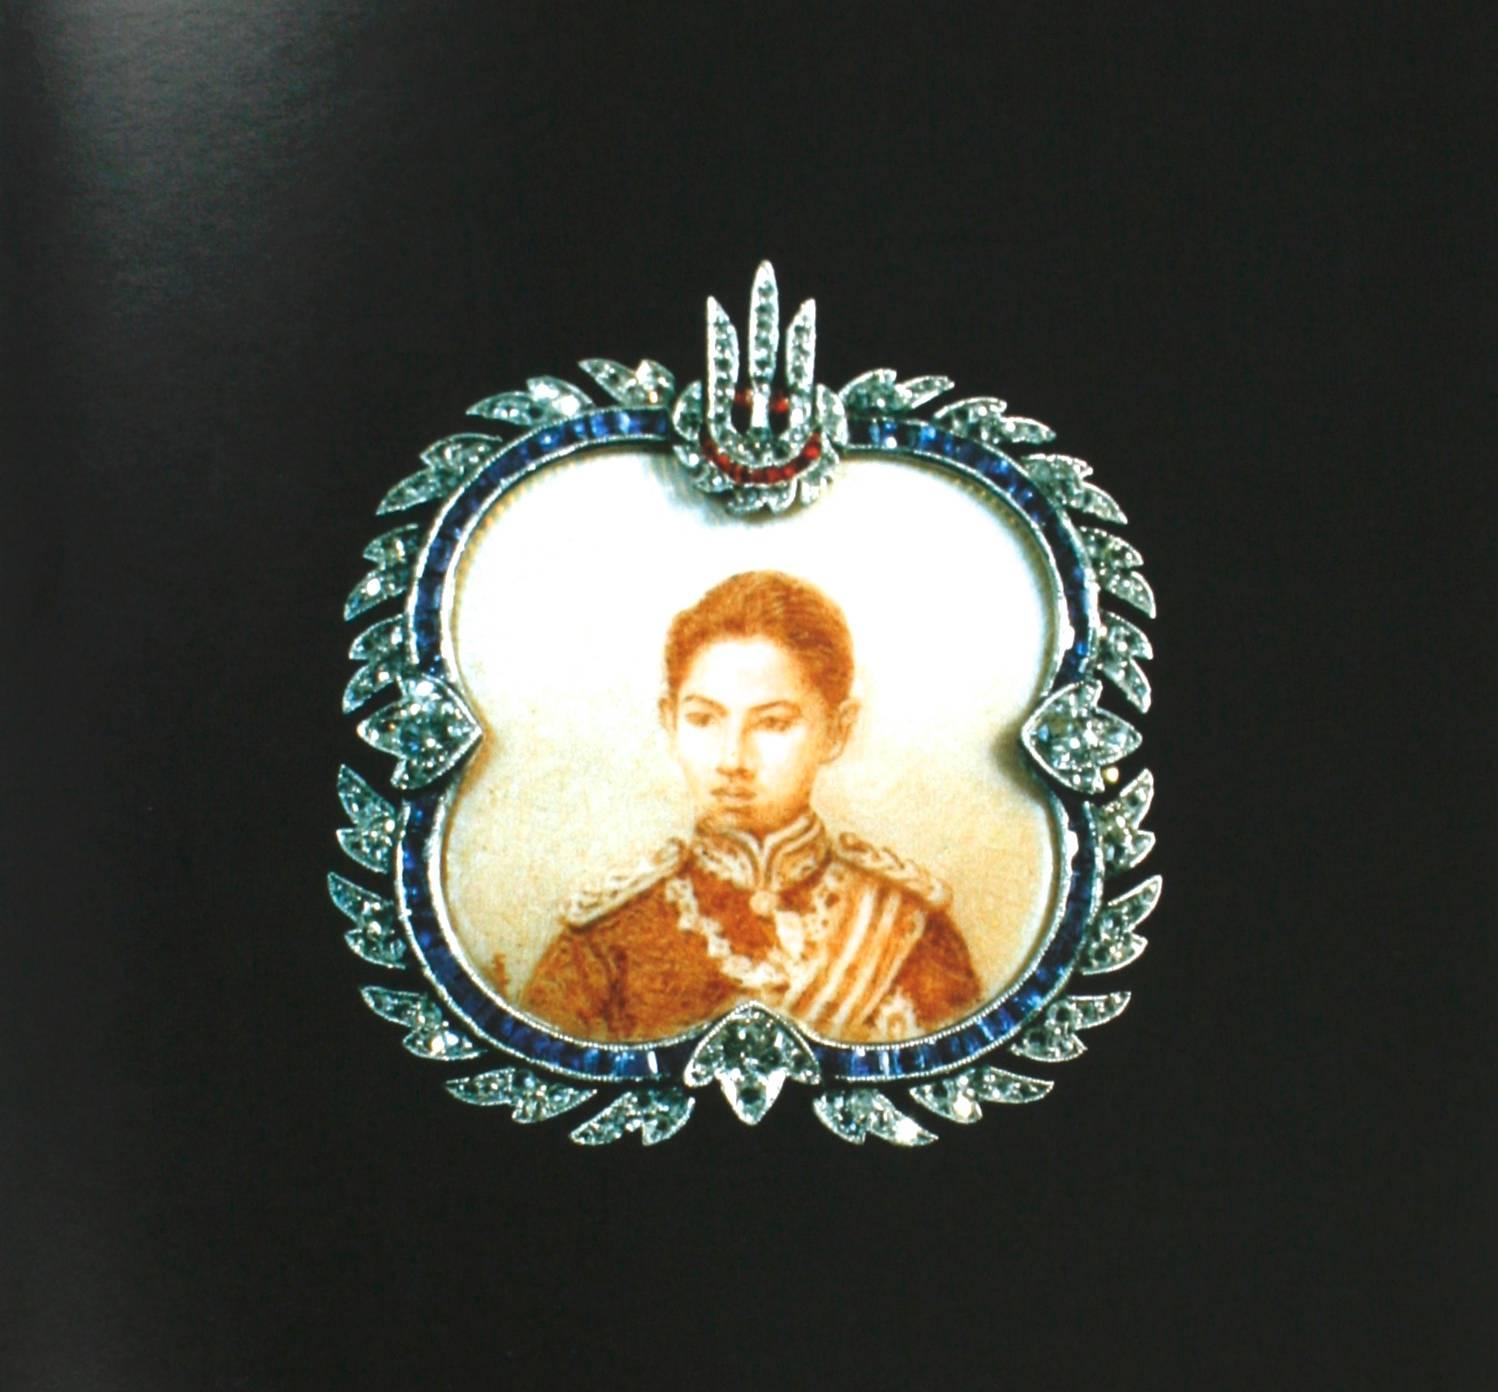 Paper Fabergé Collection of His Late Majesty King Chulalongkorn of Thailand